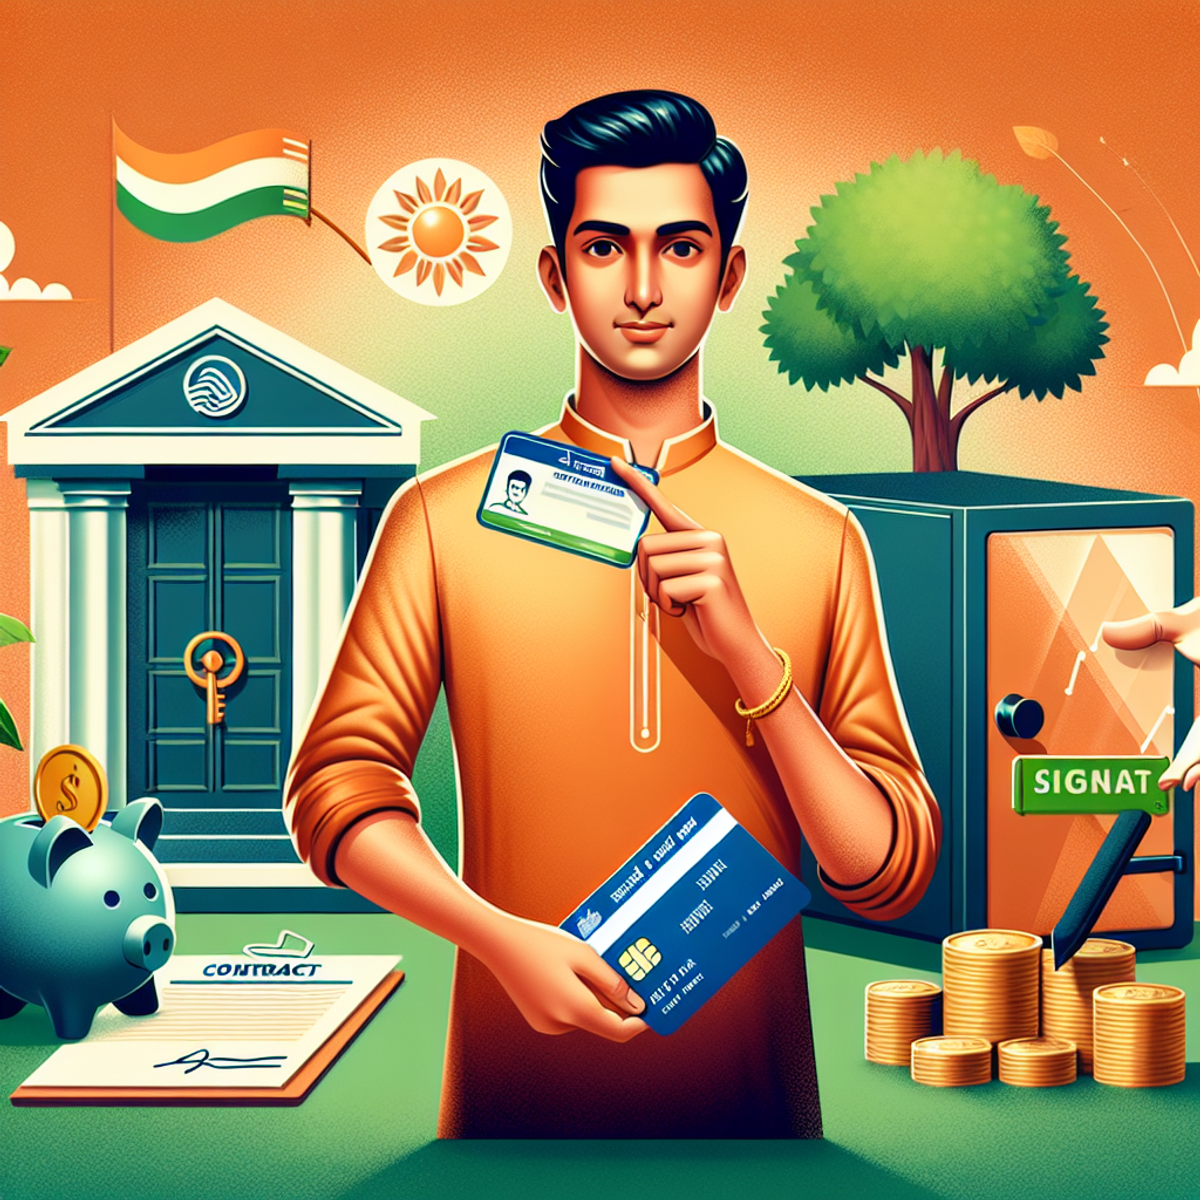 A South Asian man holding an Aadhaar card in one hand and receiving money or a signed contract in the other, with symbols of prosperity and success in the background.